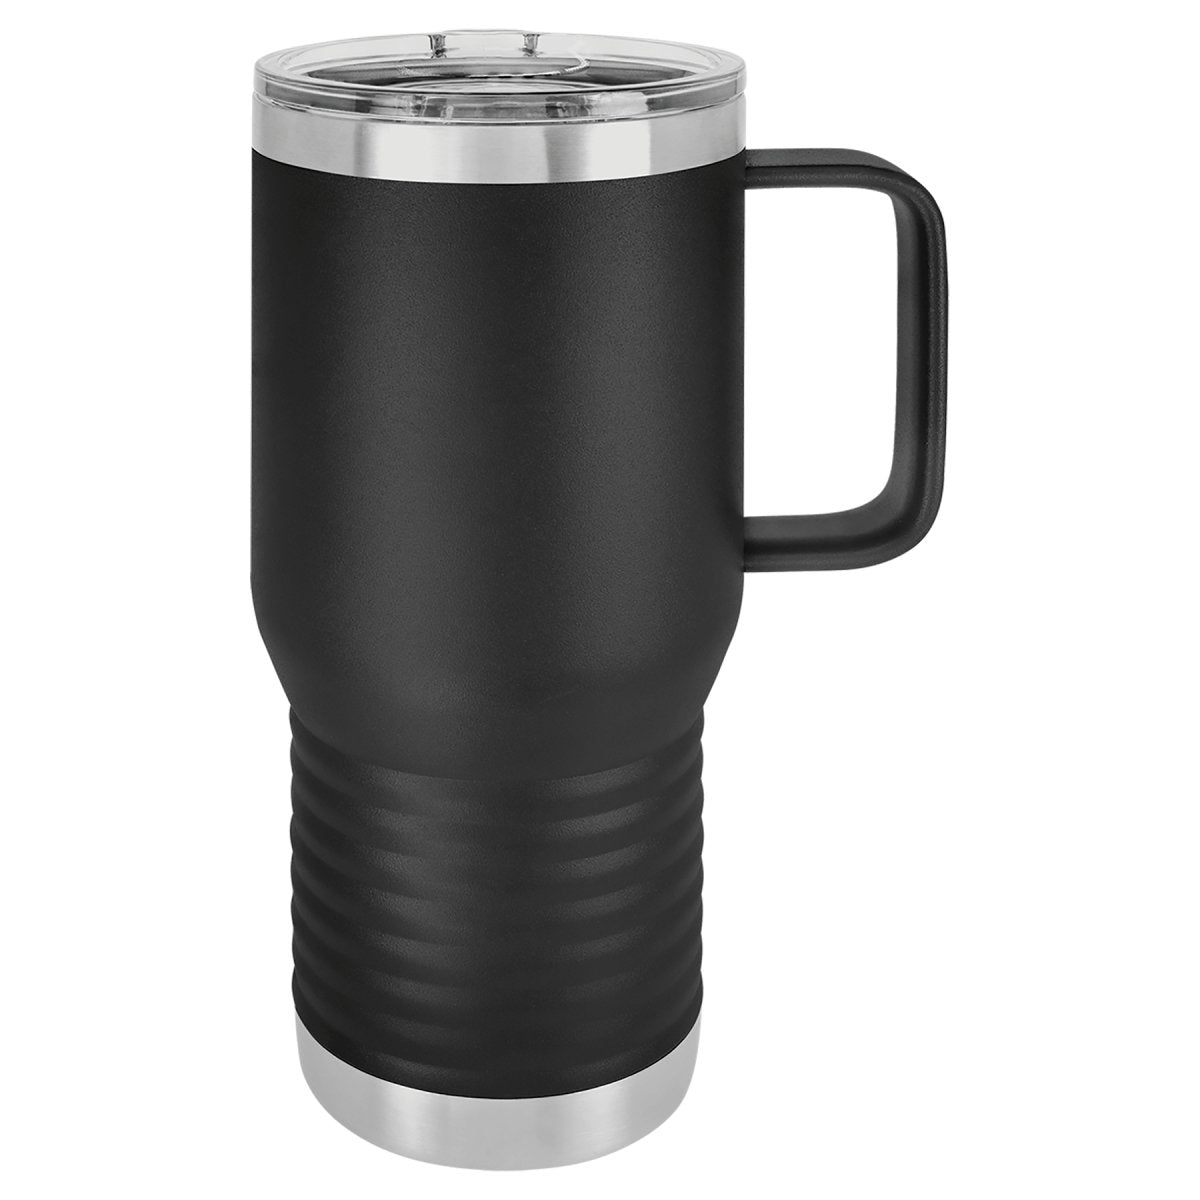 Oamaca 14OZ Coffee Mug with Lid, Vacuum Insulated Travel Tumbler with  Handle,Double Wall Stainless Steel Powder Coated Mug Cup,Spill-proof  Thermos Cup